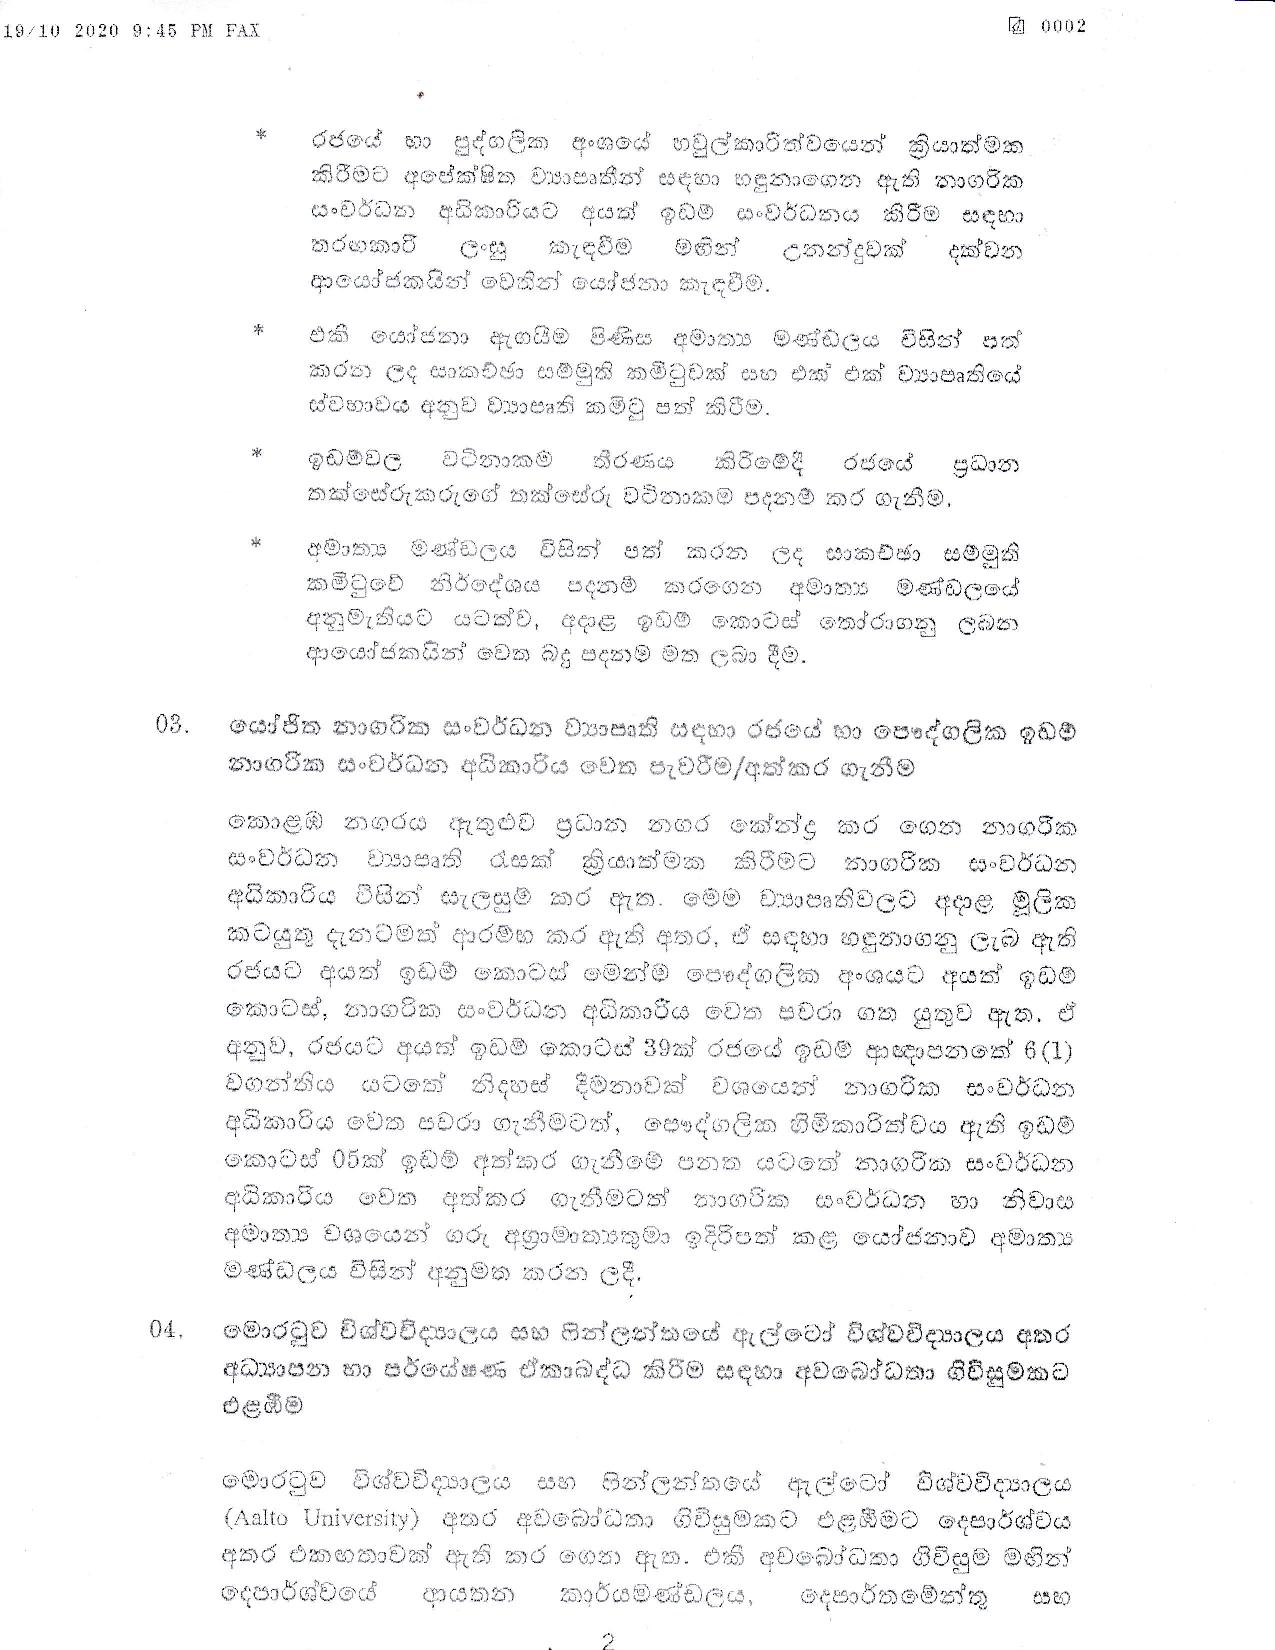 Cabinet Decision on 19.10.2020 page 002